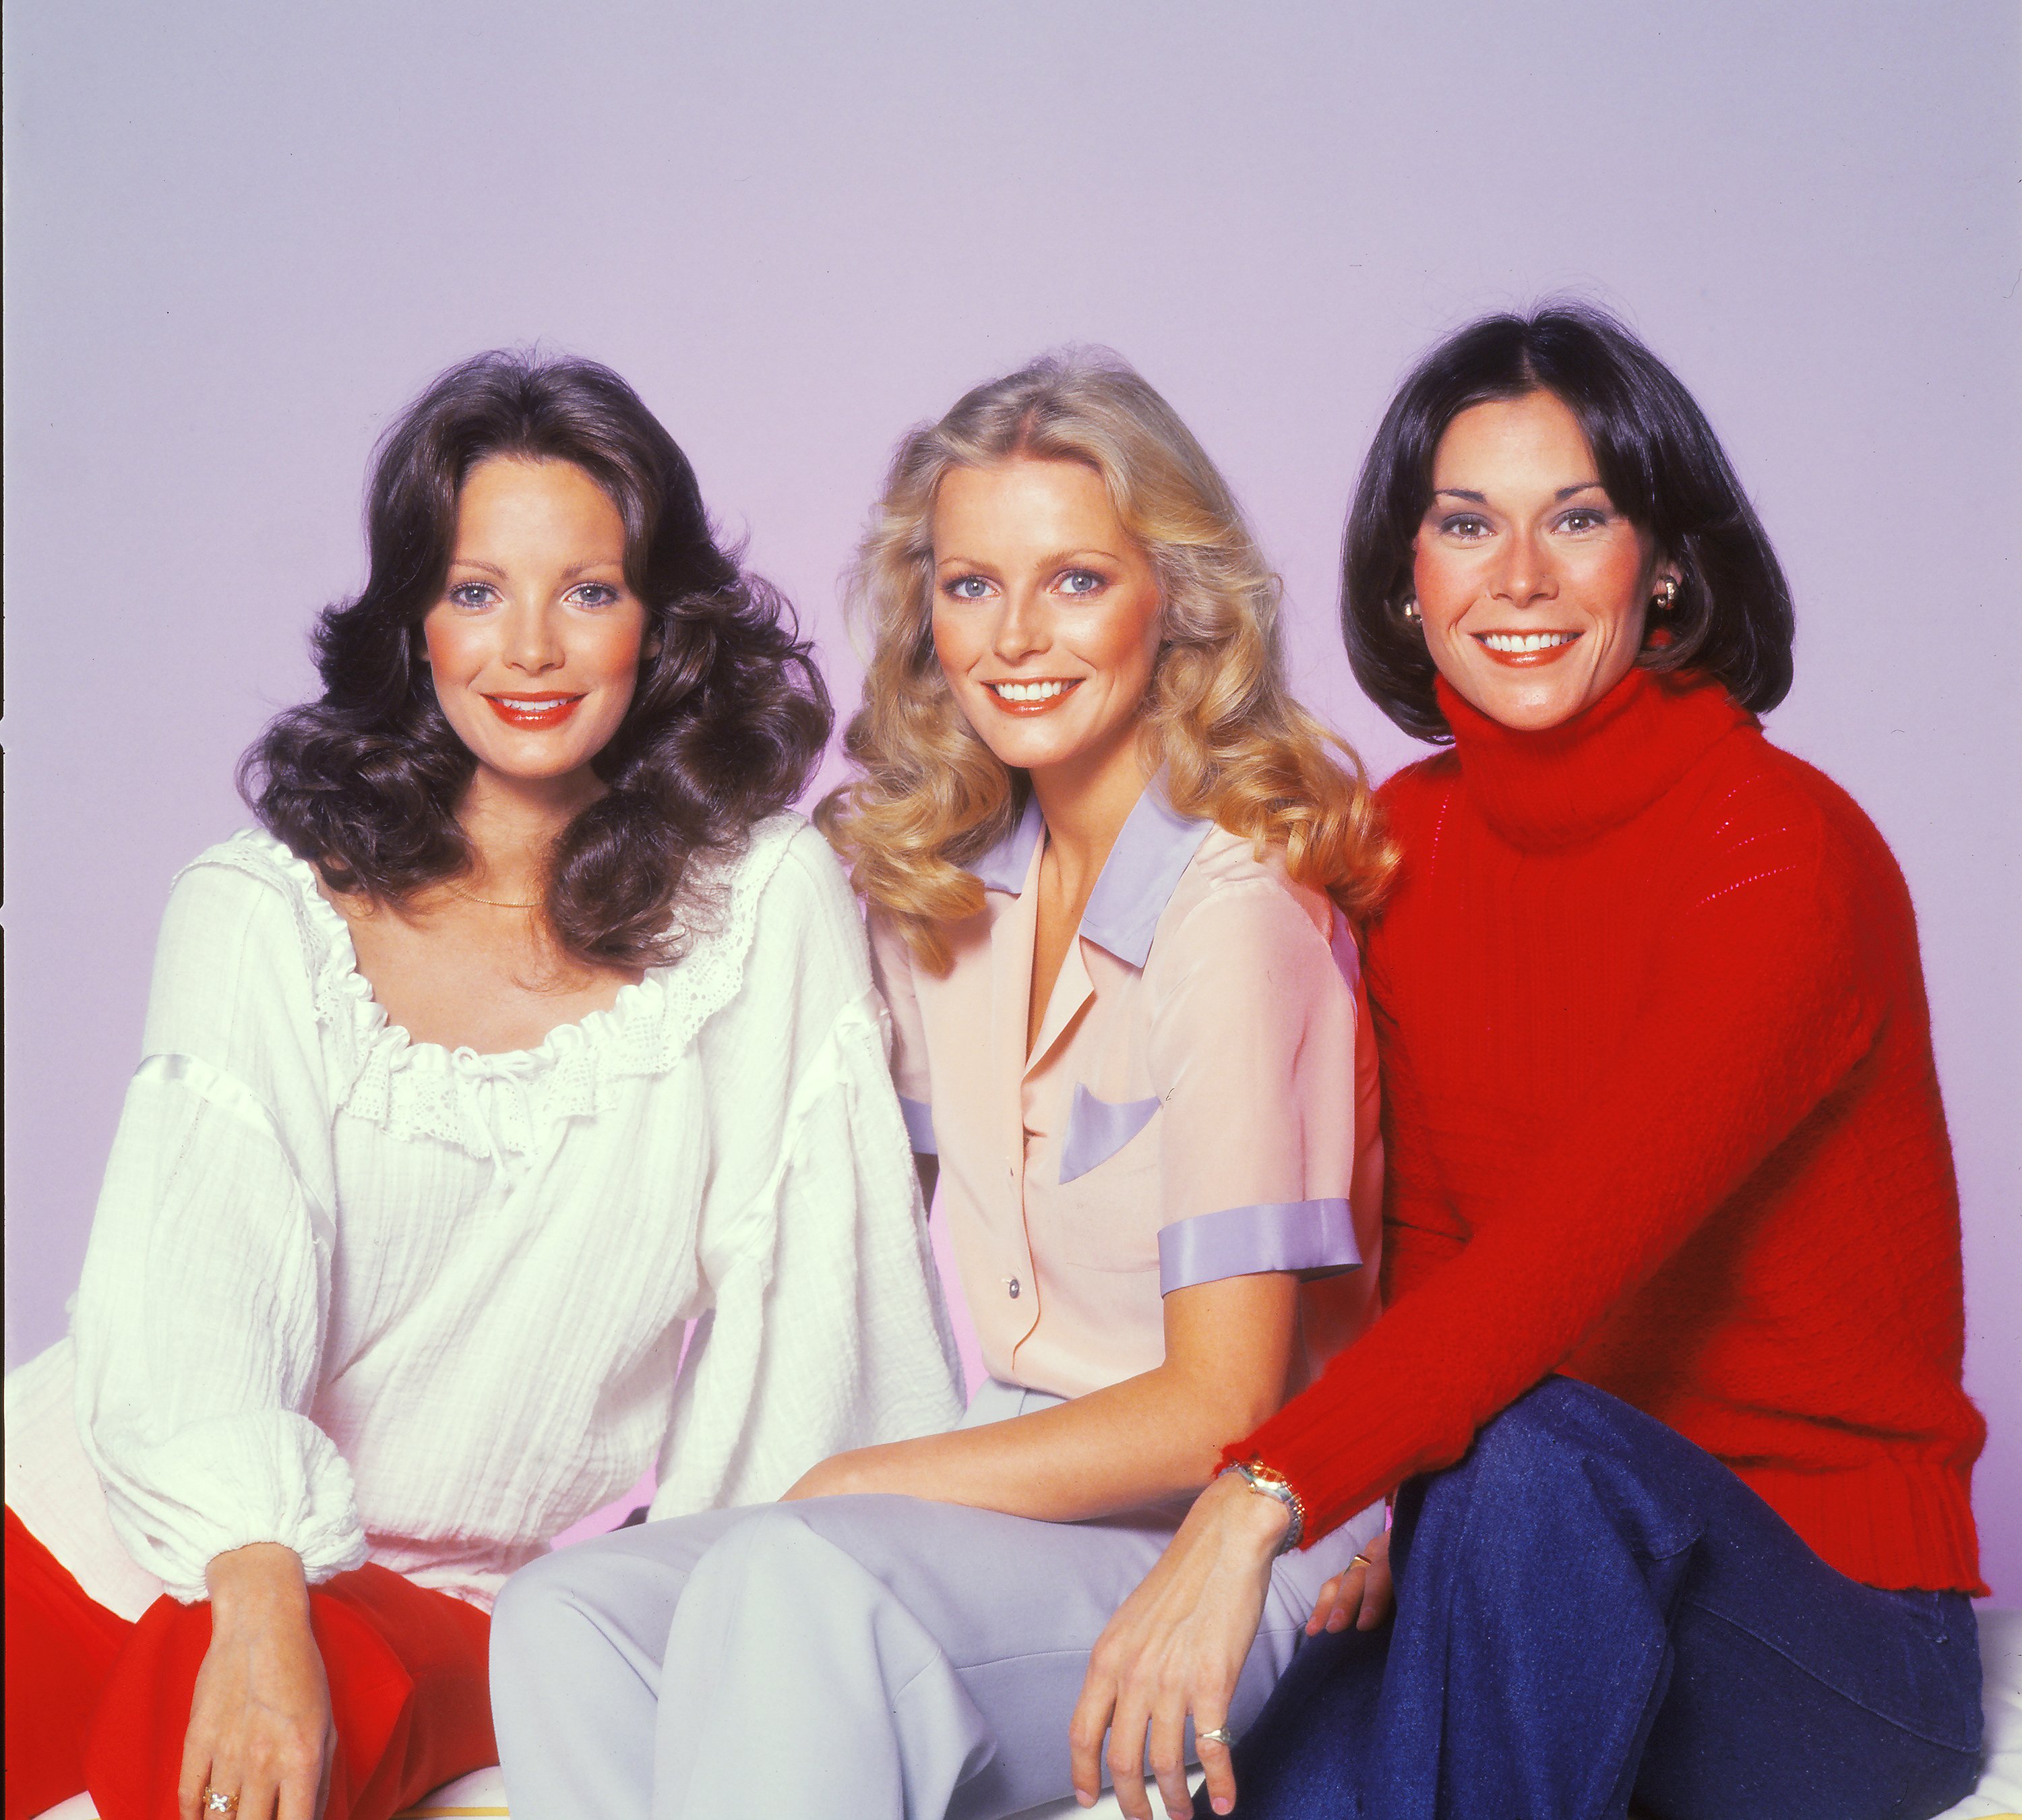 "Charlie's Angels" Chery Ladd, Jaclyn Smith, and Kate Jackson pose for a portrait in 1978 in Los Angeles | Source: Getty Images